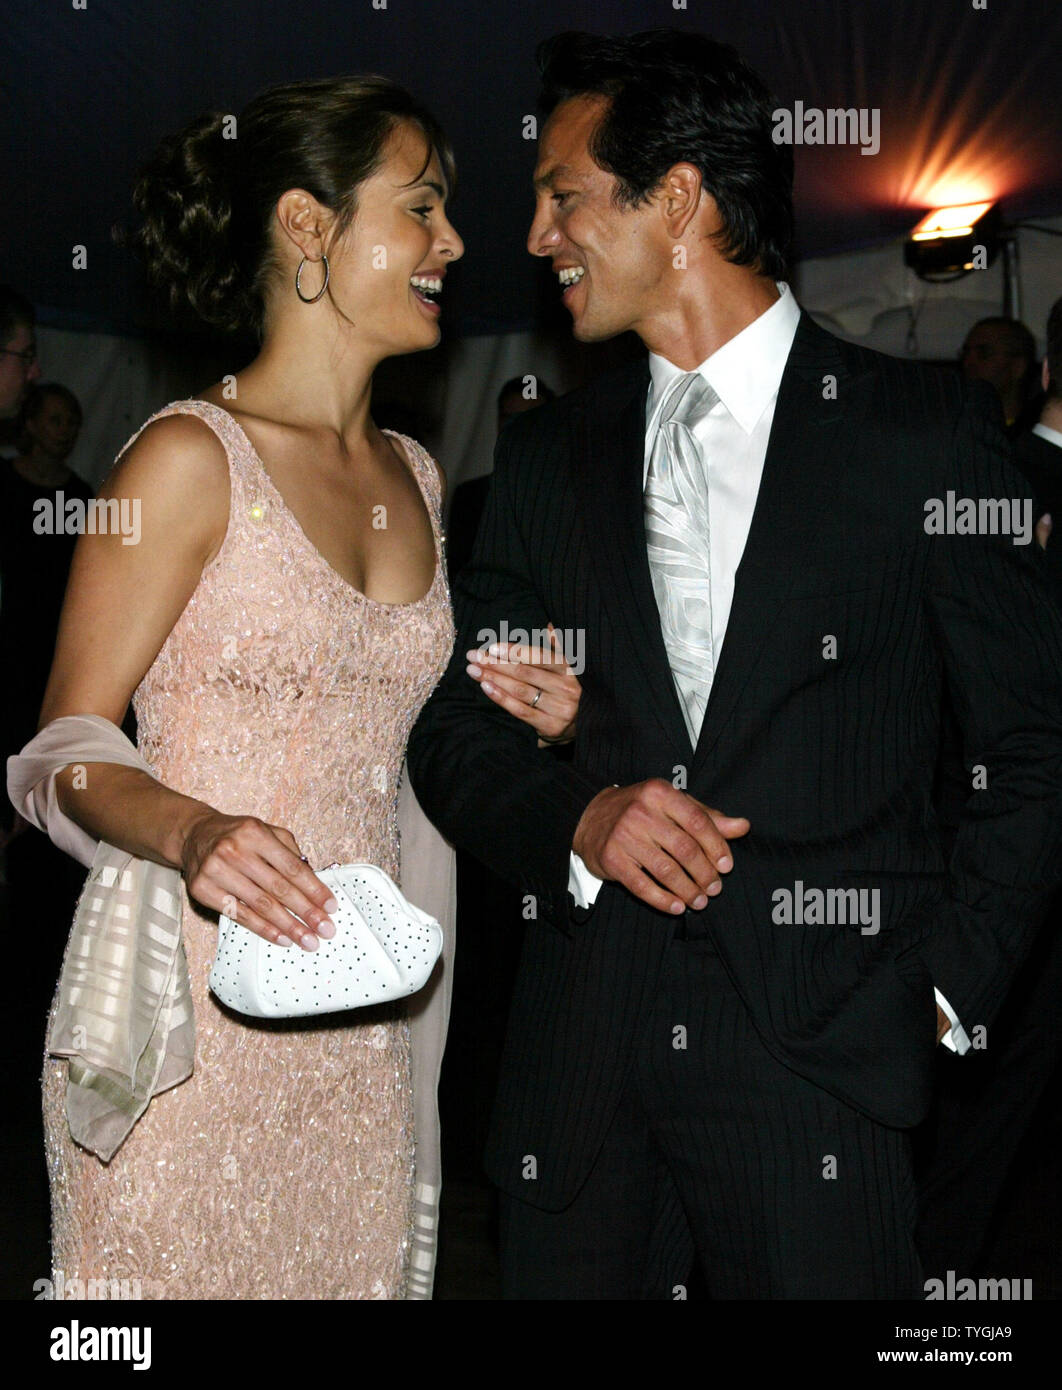 Benjamin Bratt and wife Talisa Soto pose for pictures at the Costume Institute Gala Celebrating 'Dangerous Liaisons: Fashion and Furniture in the 18th Century' at the Metropolitan Museum of Art in New York on April 26, 2004.   (UPI Photo/Laura Cavanaugh) Stock Photo